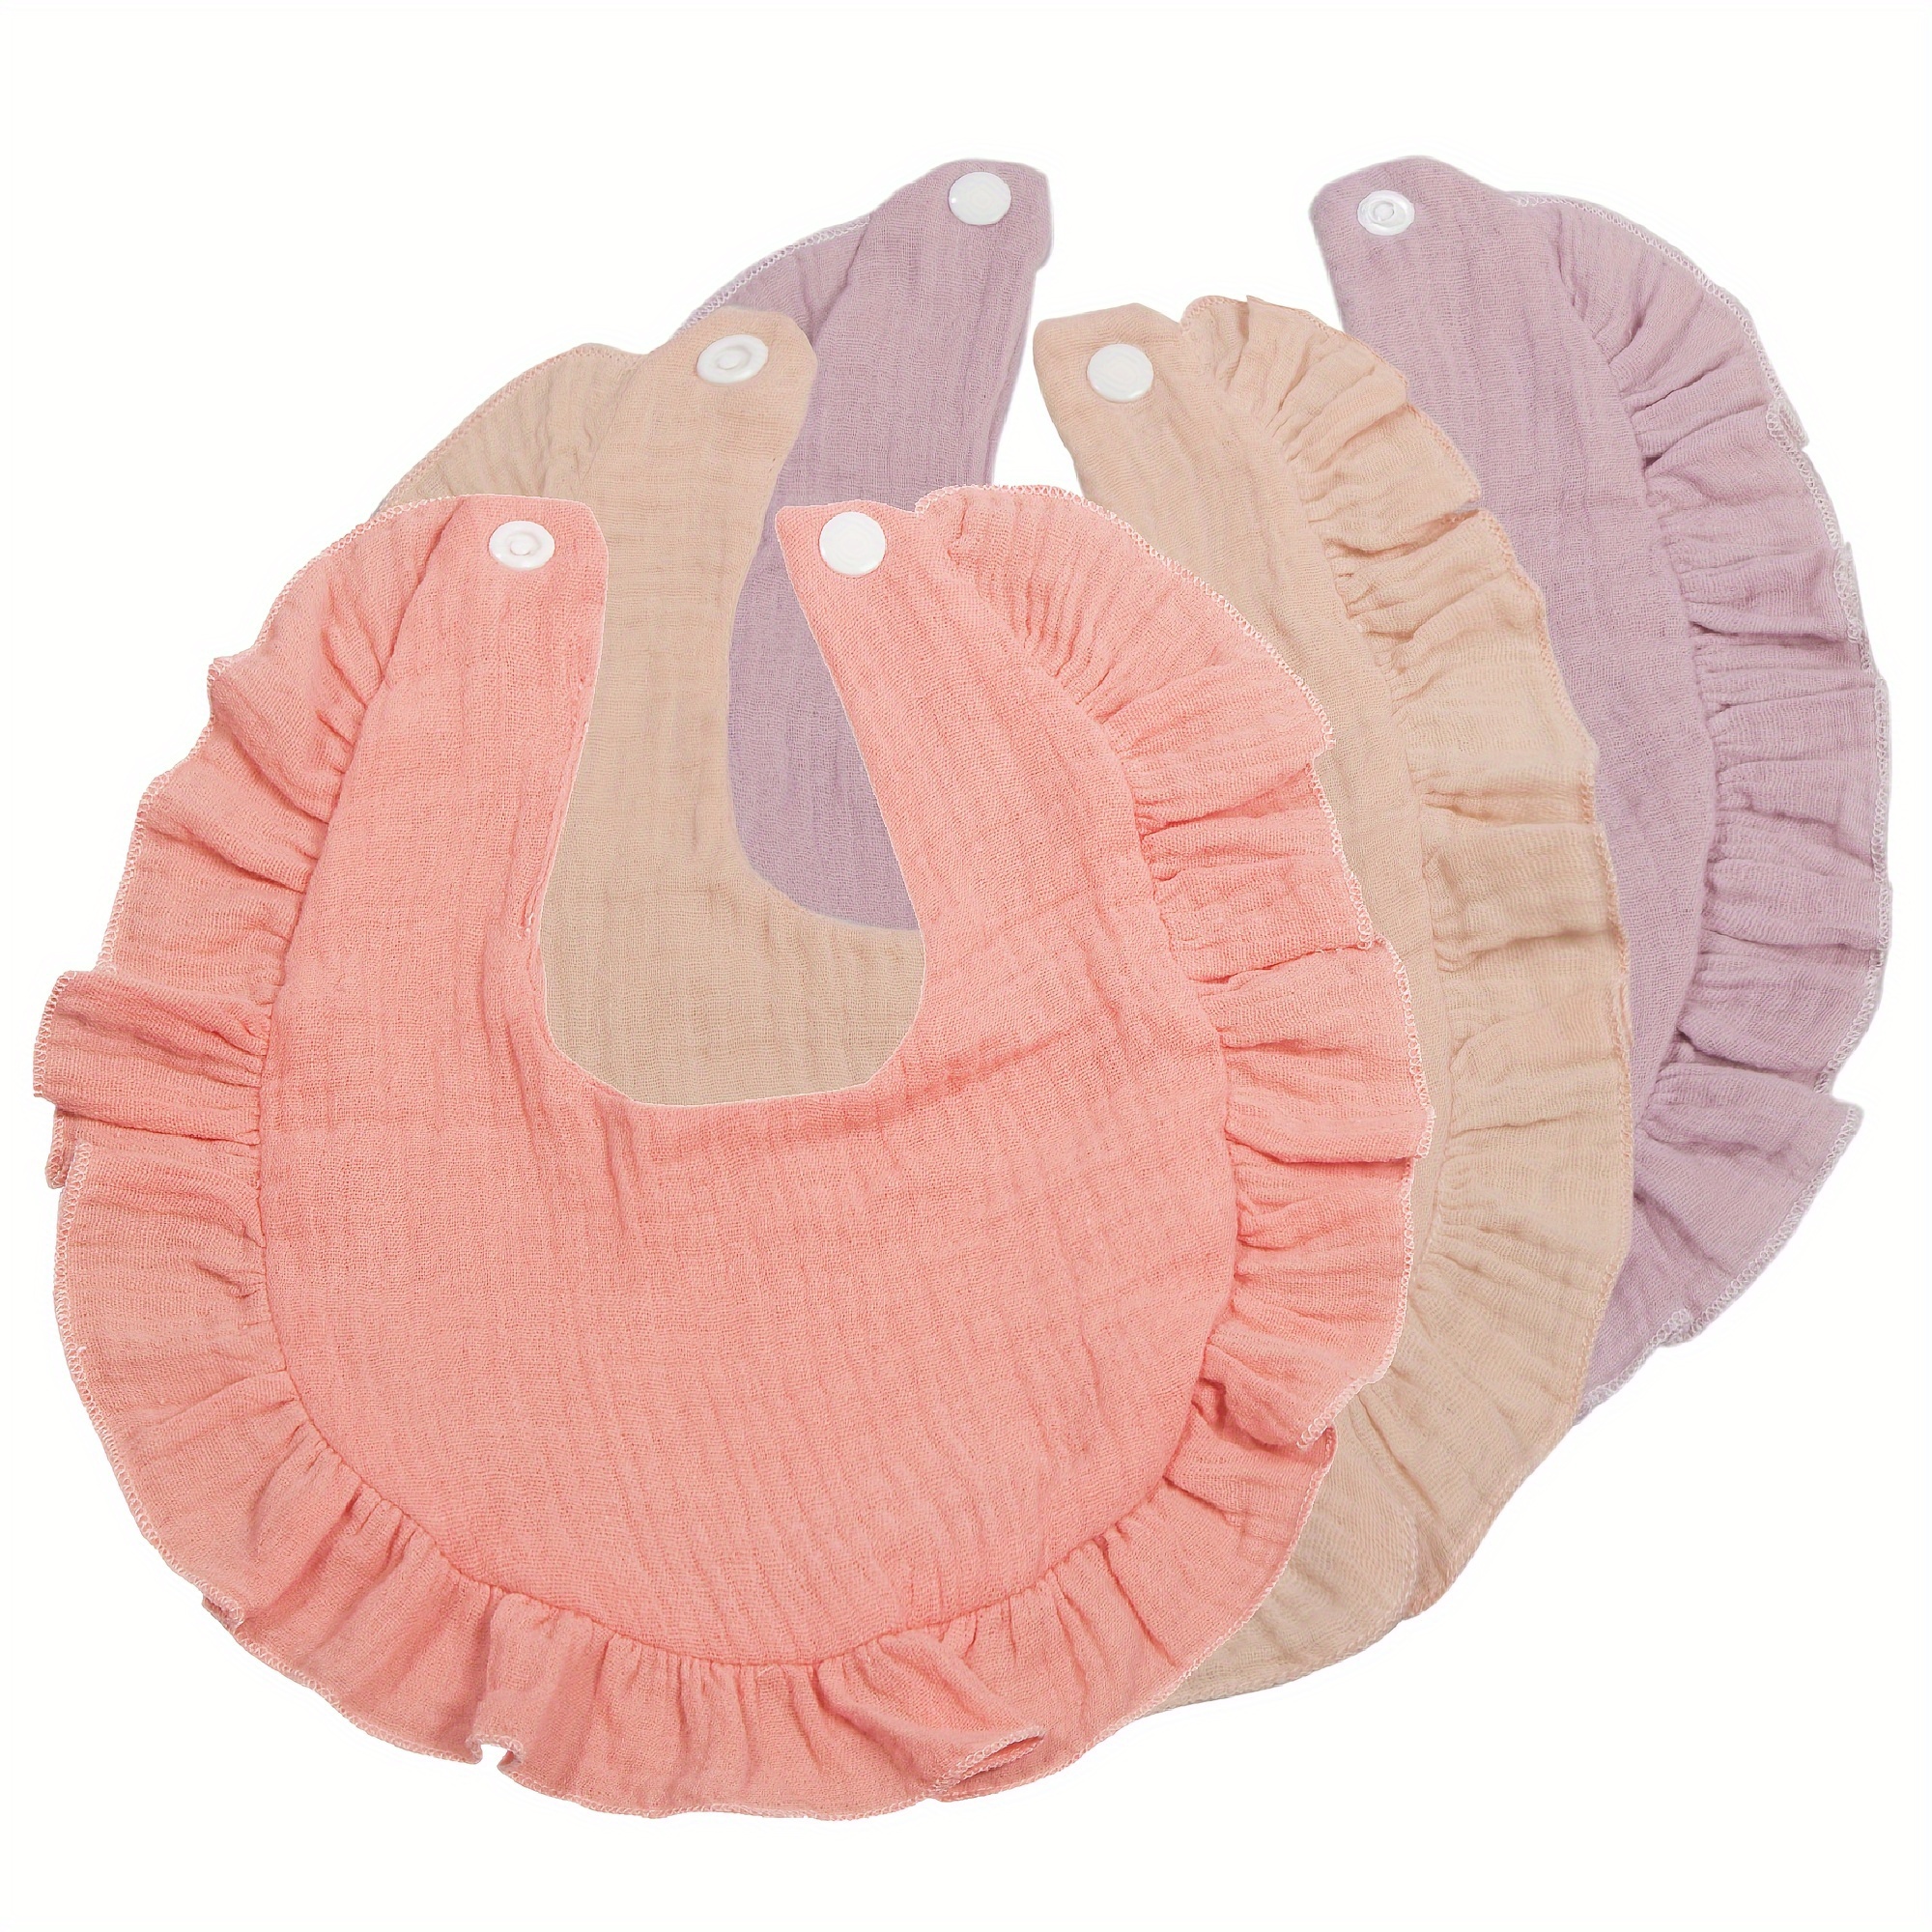 

3pcs New Baby Bibs With Lotus Leaf Edge, Made Of Solid Color Gauze Fabric, Absorbent, Soft And Breathable